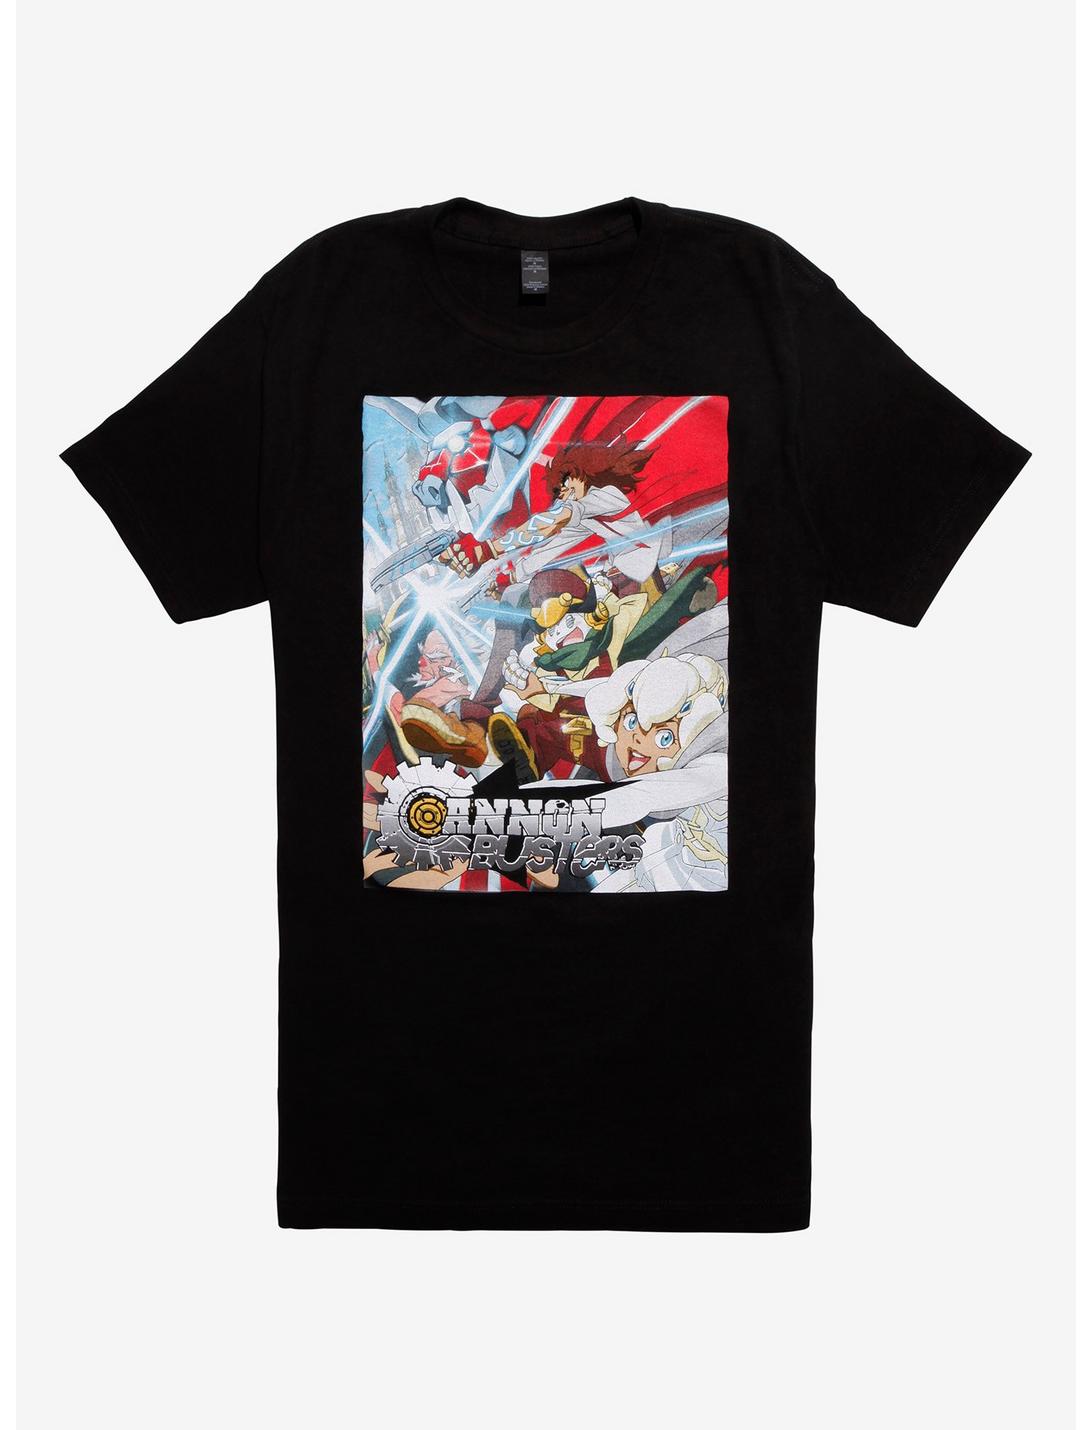 Cannon Busters Poster Art T-Shirt, MULTI, hi-res